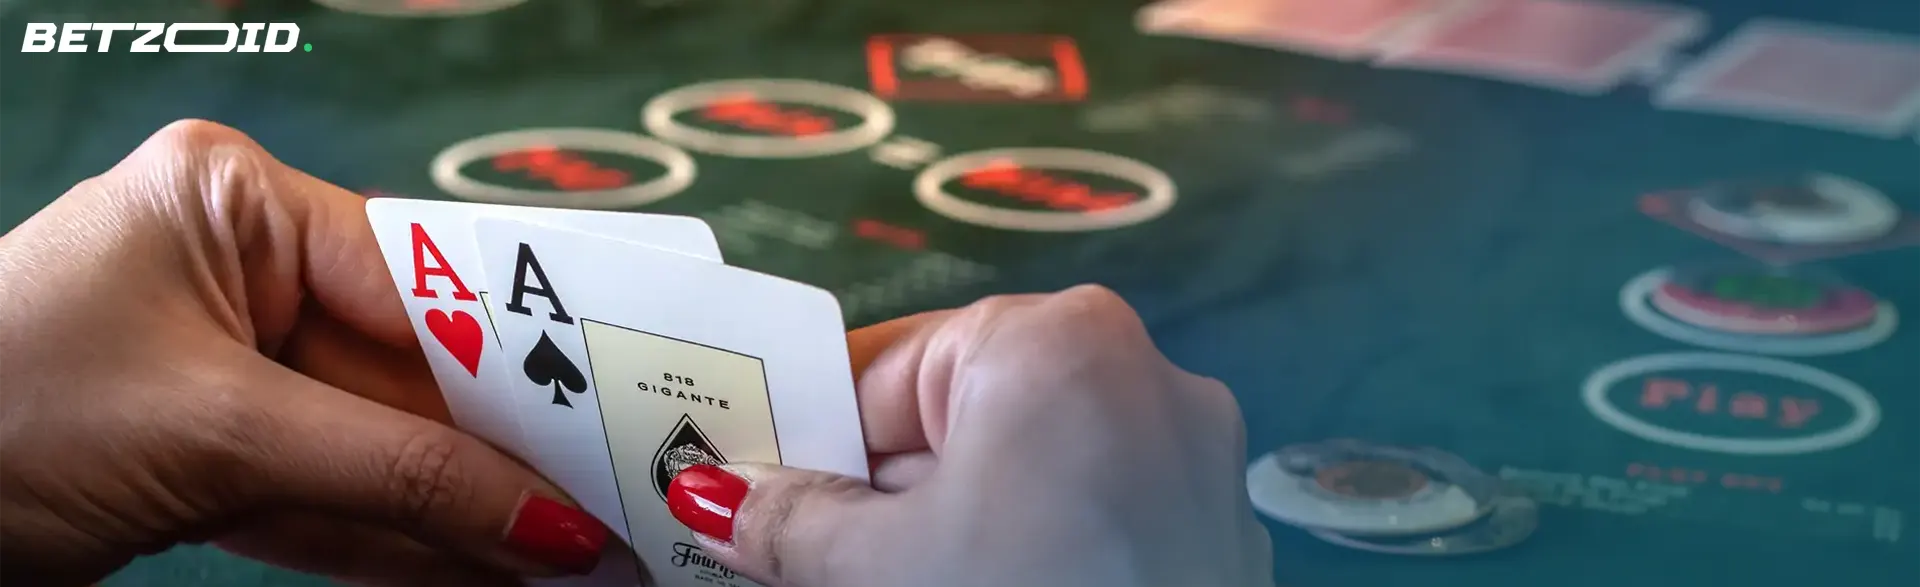 Hands holding cards at reputable online casinos.